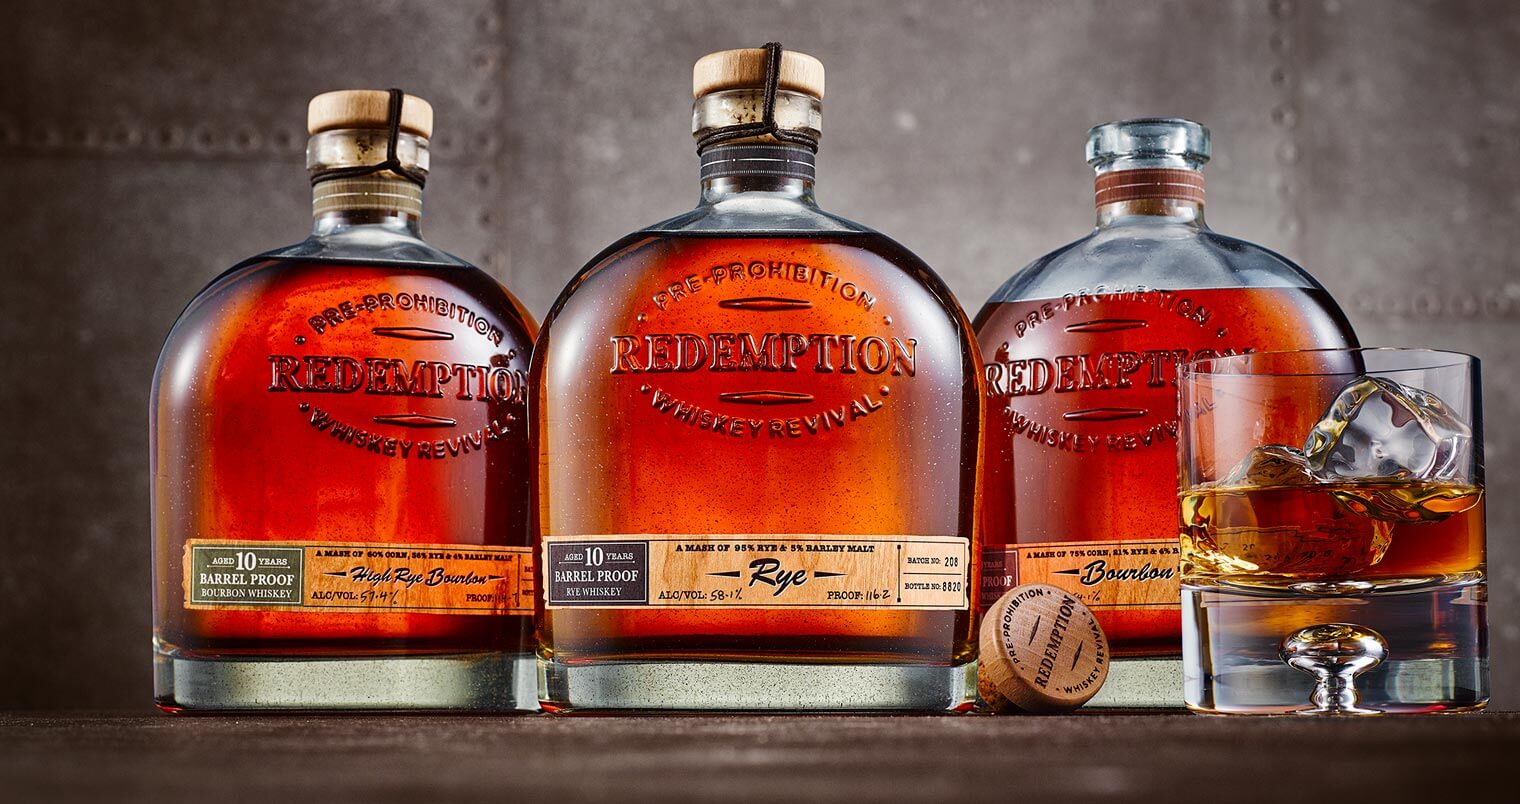 Redemption Whiskey Releases Limited-Edition Aged Barrel Proof Selections, featured image